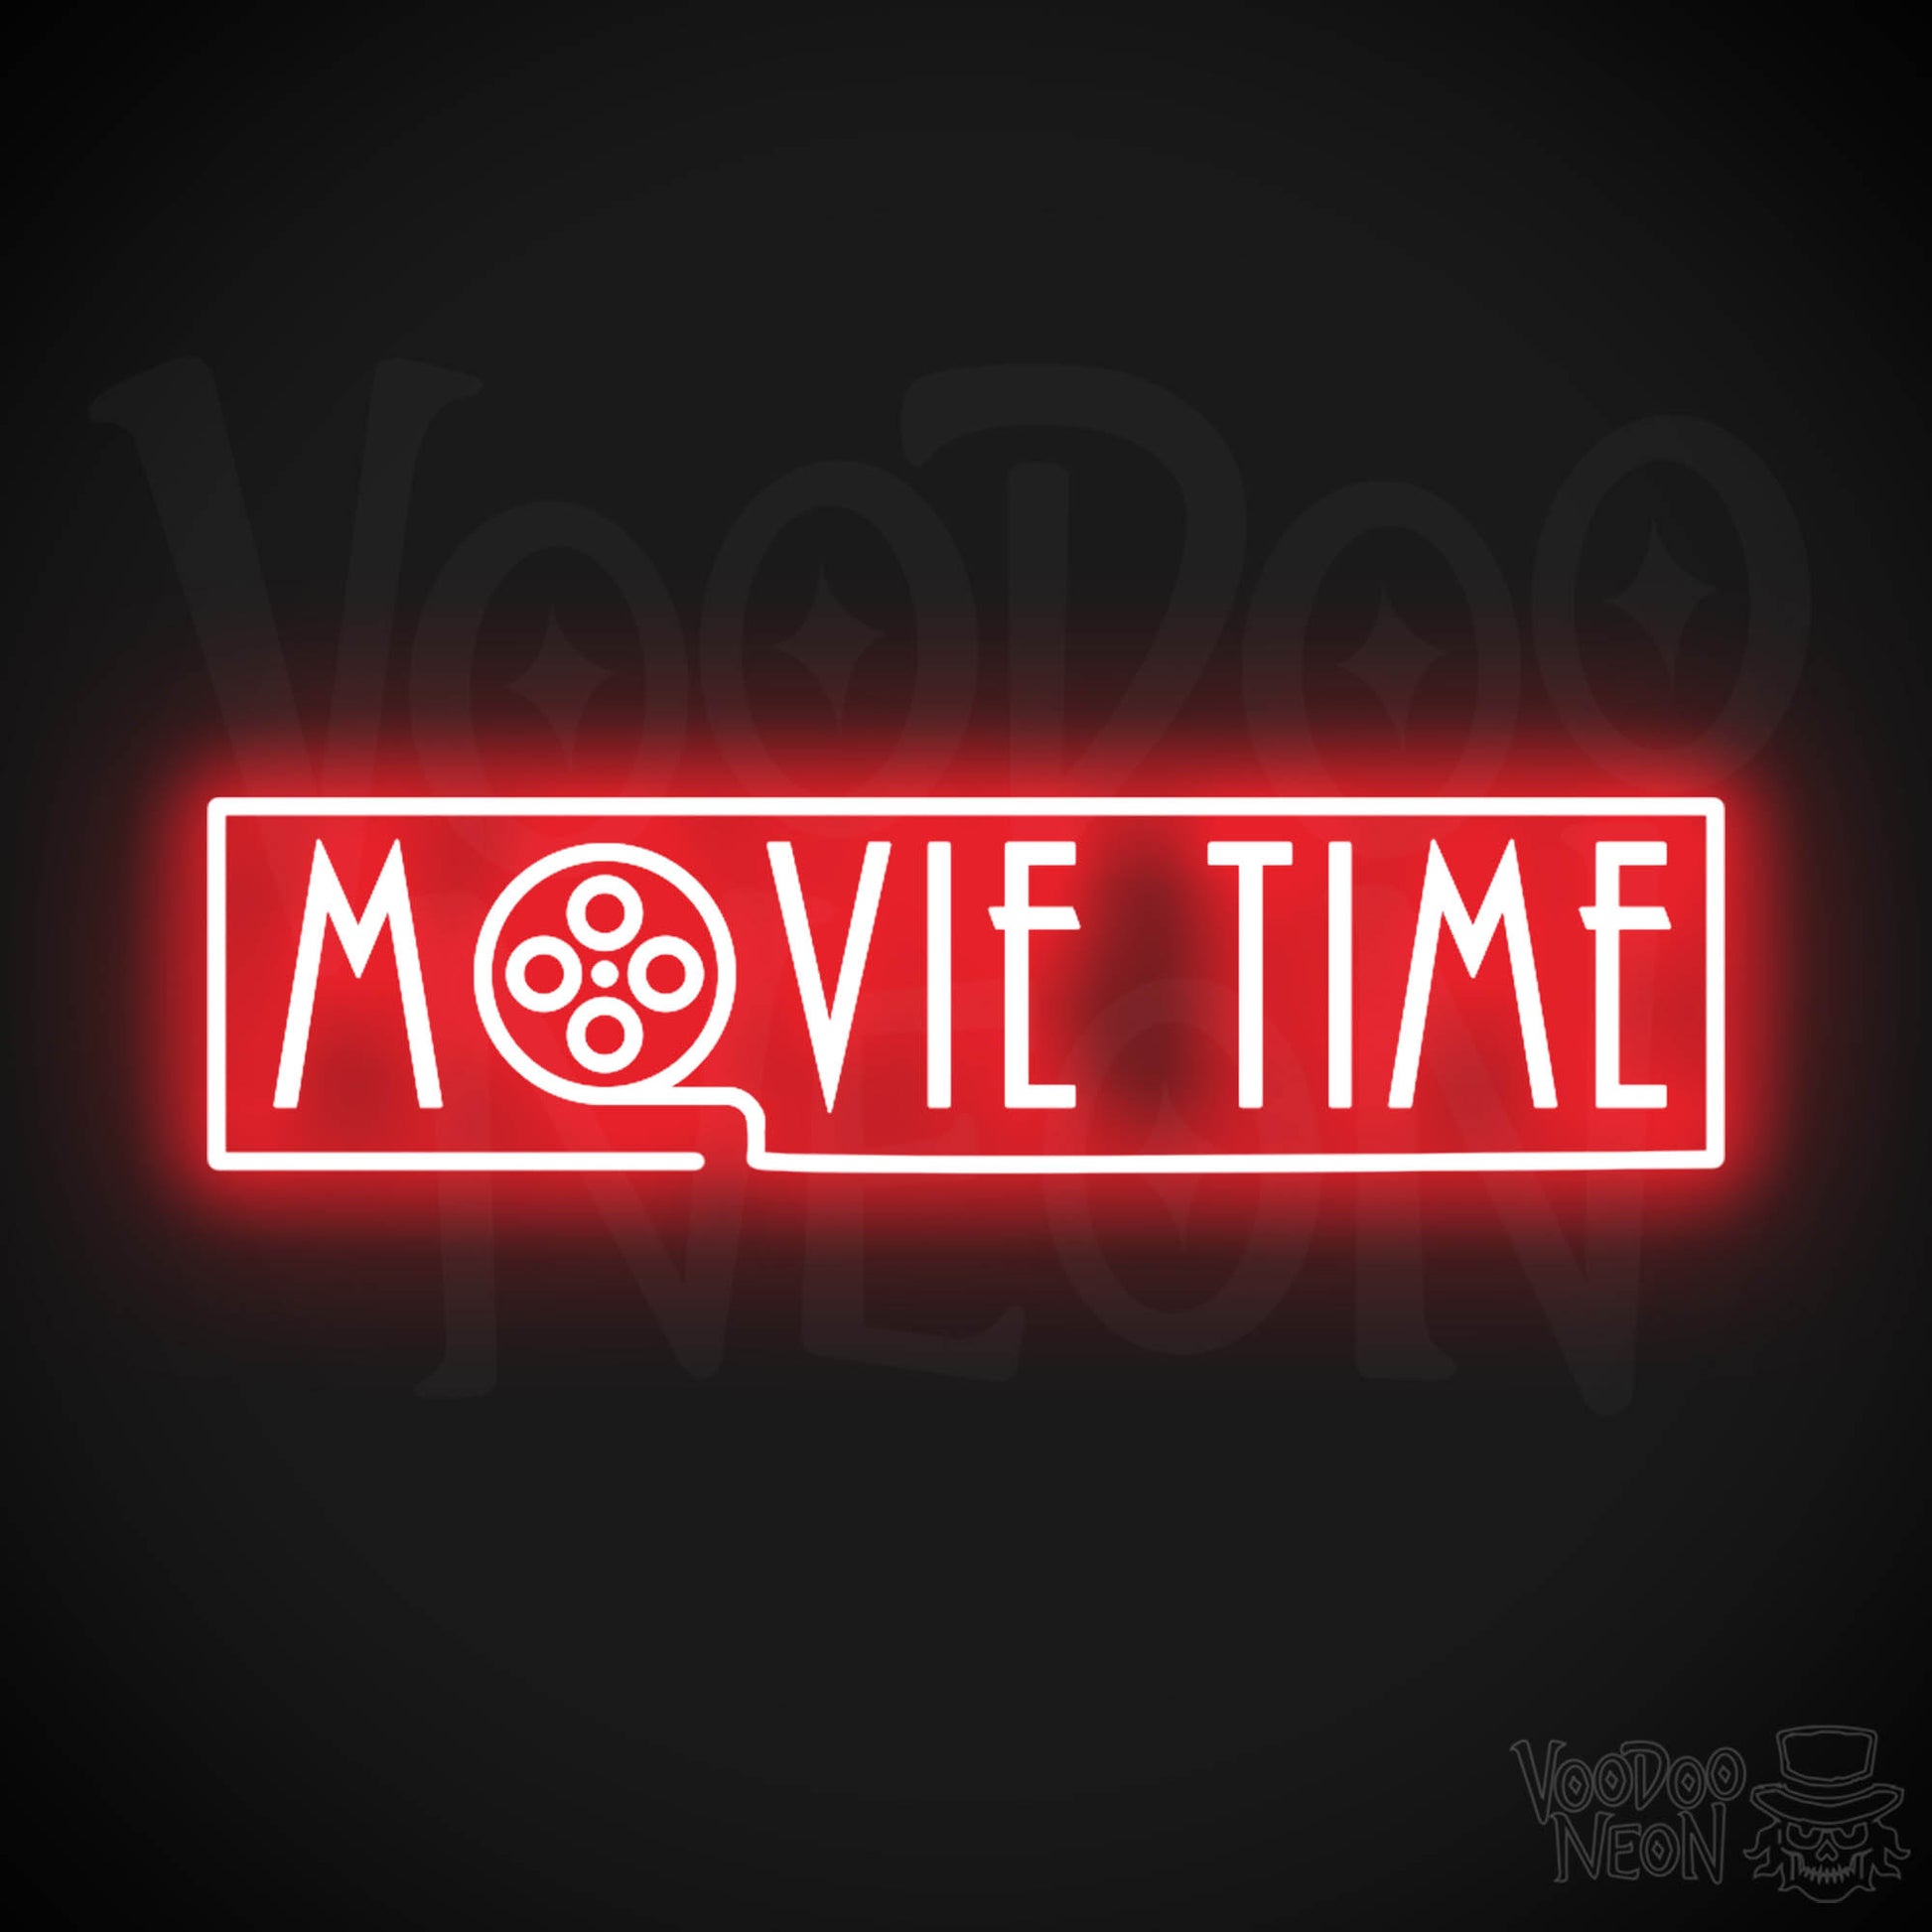 Movie Time Neon Sign - Neon Movie Time Sign - Color Red